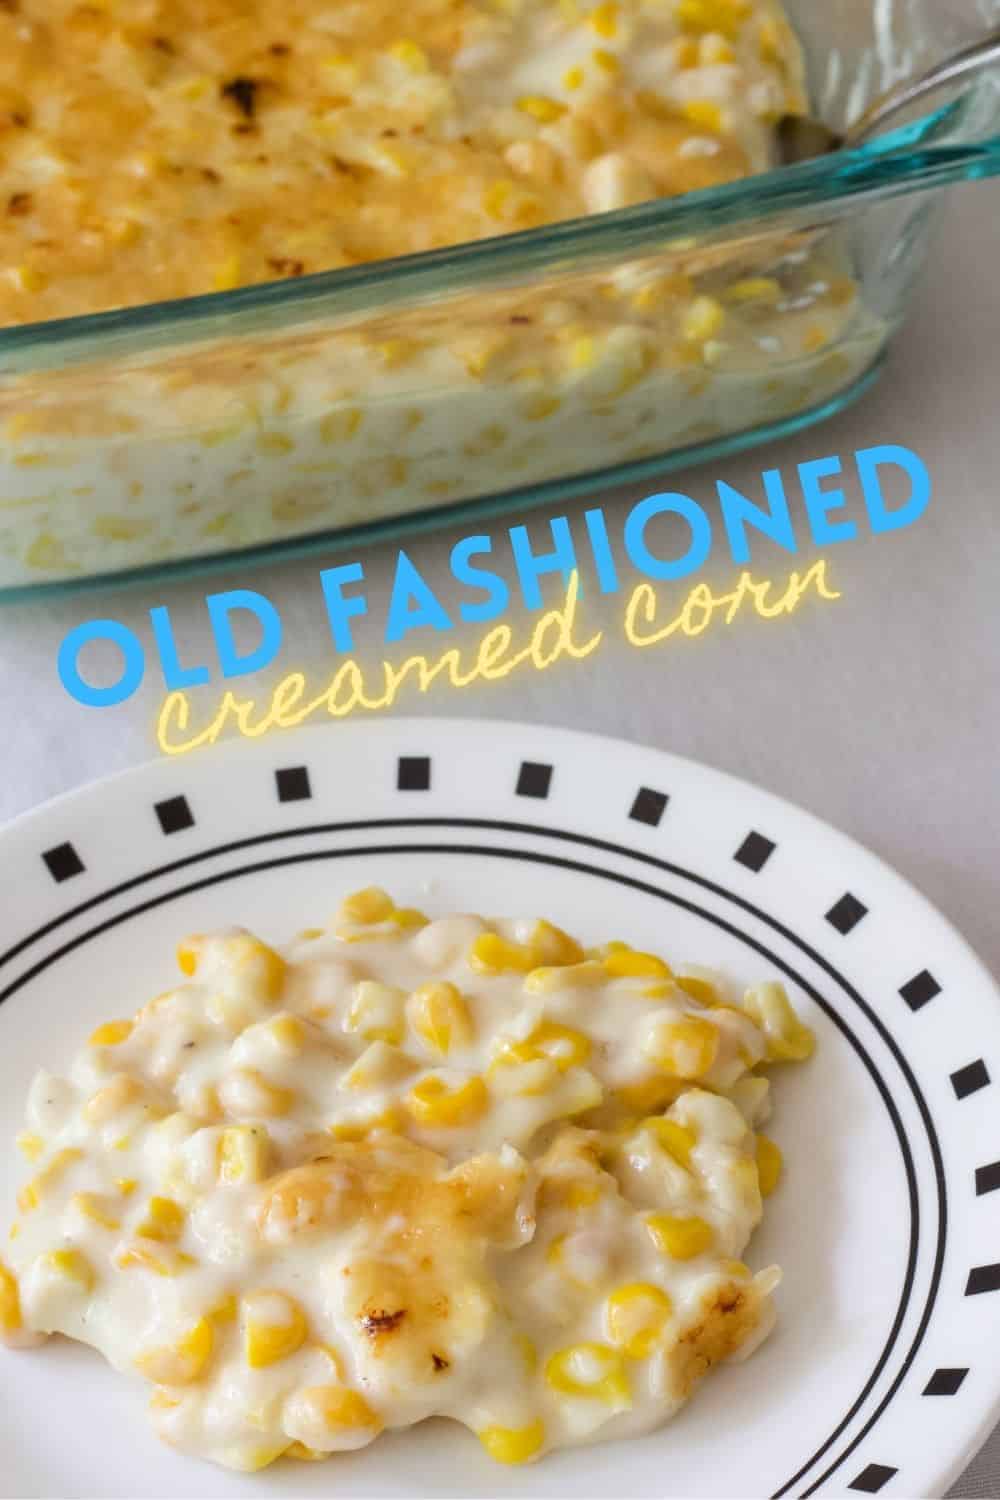 Old Fashioned Creamed Corn - a traditional Native American dish requiring only a handful of ingredients. Ours is sweet, creamy and delicious. via @mindyscookingobsession